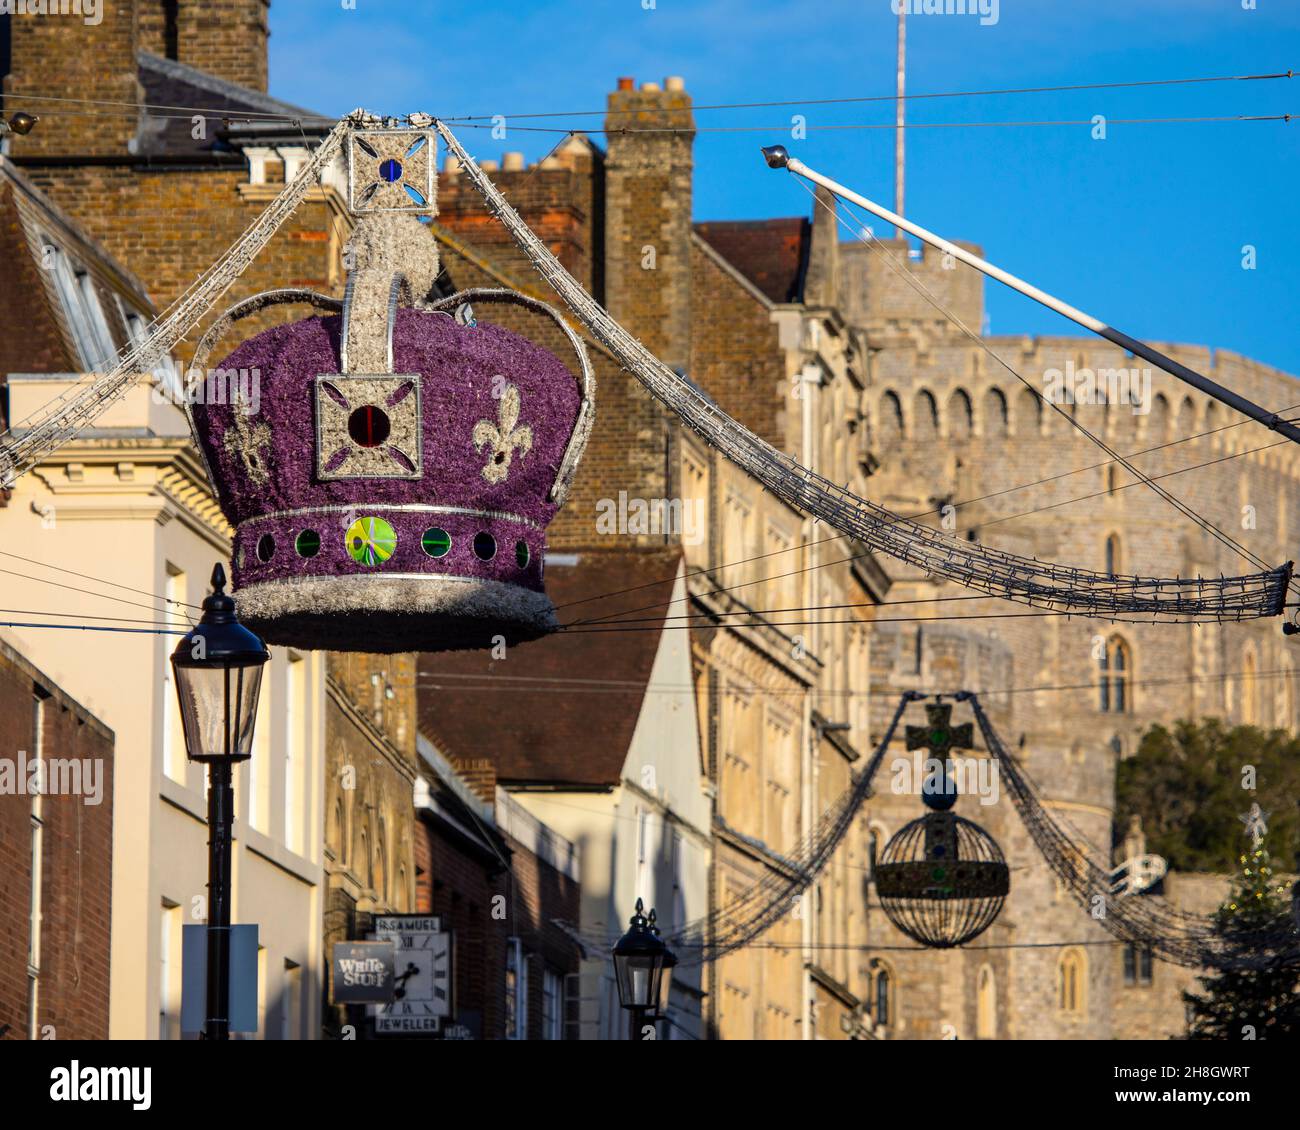 Windsor, UK - November 28th 2021: A Royal Crown Christmas decoration in the town centre of Windsor, with Windsor Castle in the background, in Berkshir Stock Photo